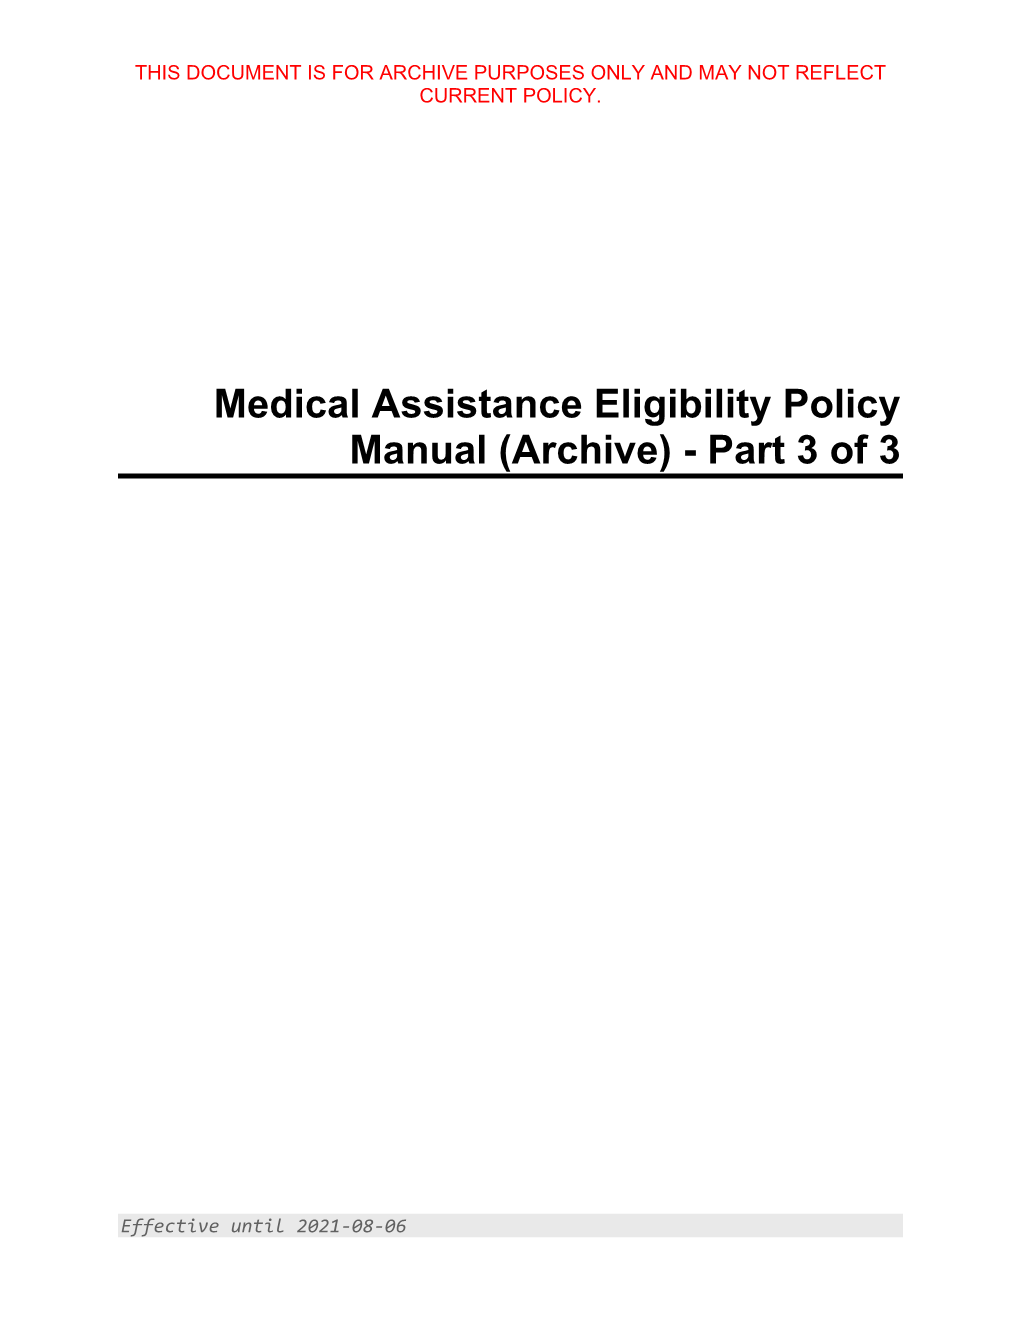 Medical Assistance Eligibility Policy Manual (Archive) - Part 3 of 3